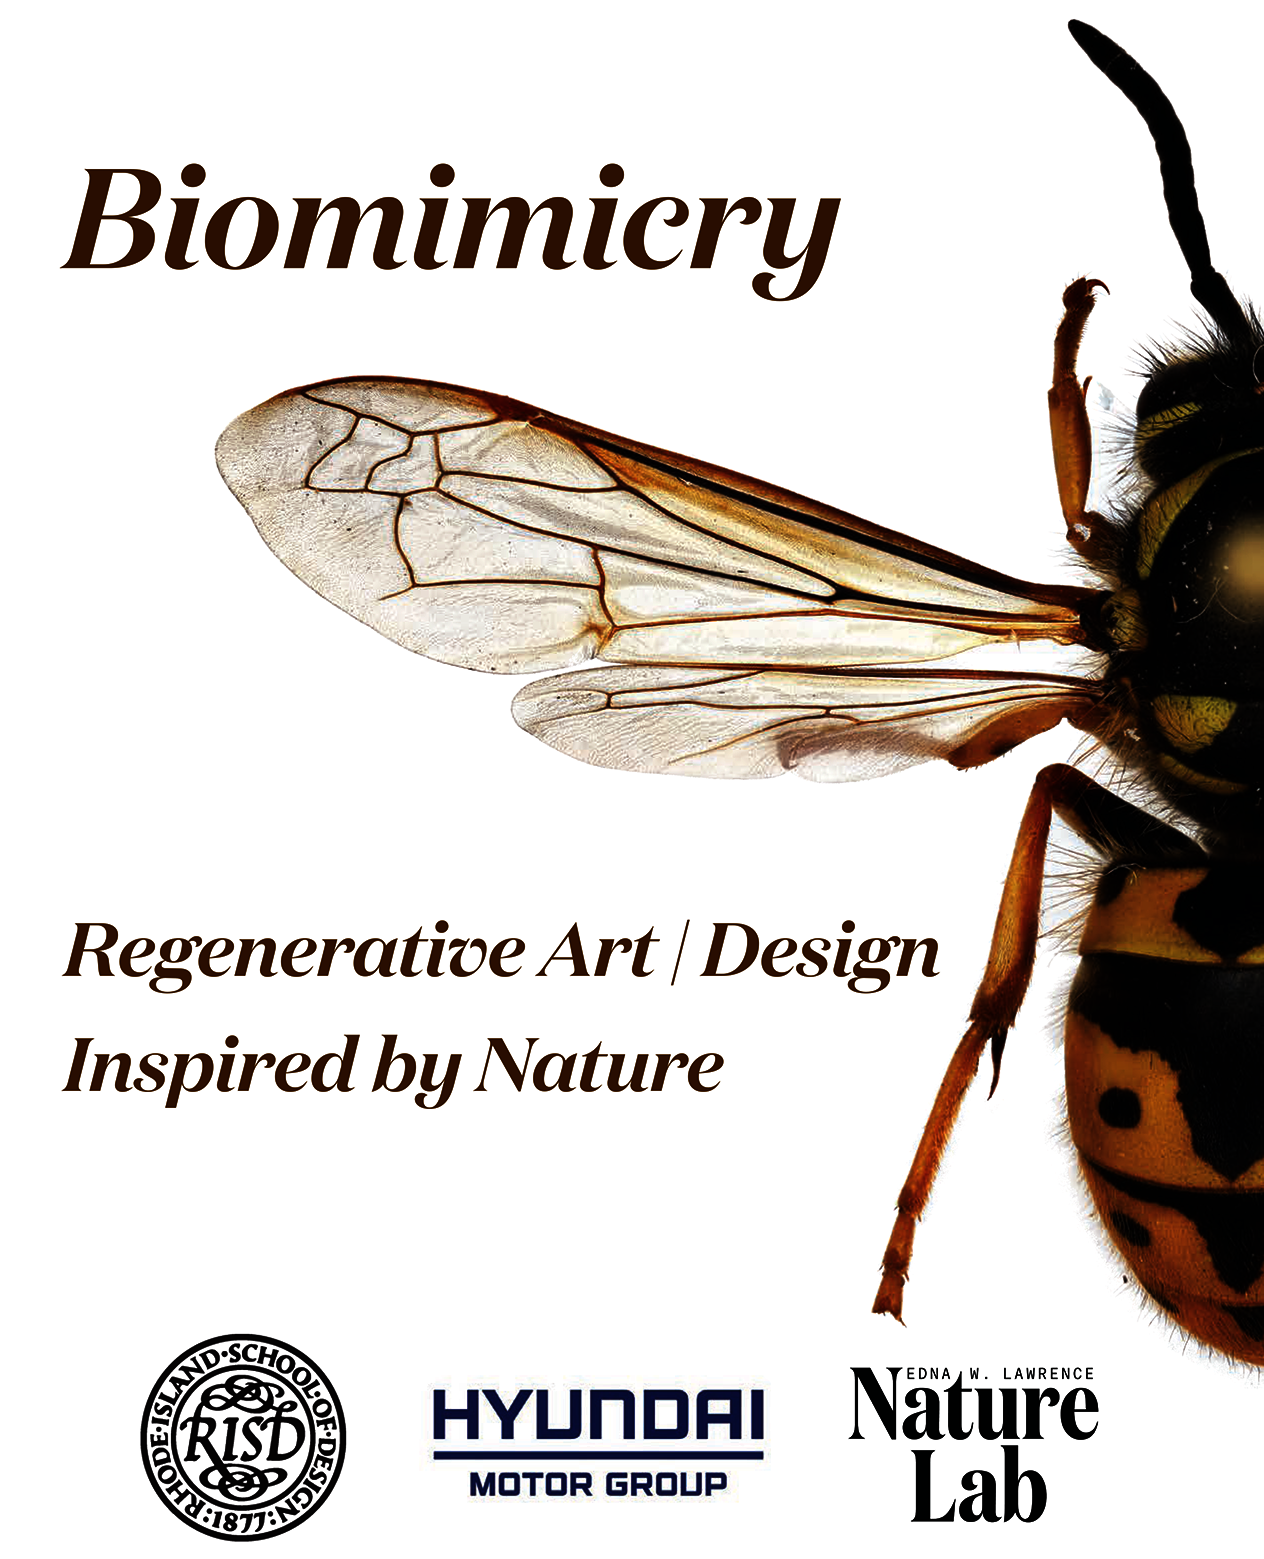 A close-up image of a bee with wings outstretched. Text: Biomimicry: Regenerative Art/Design Inspired by Nature